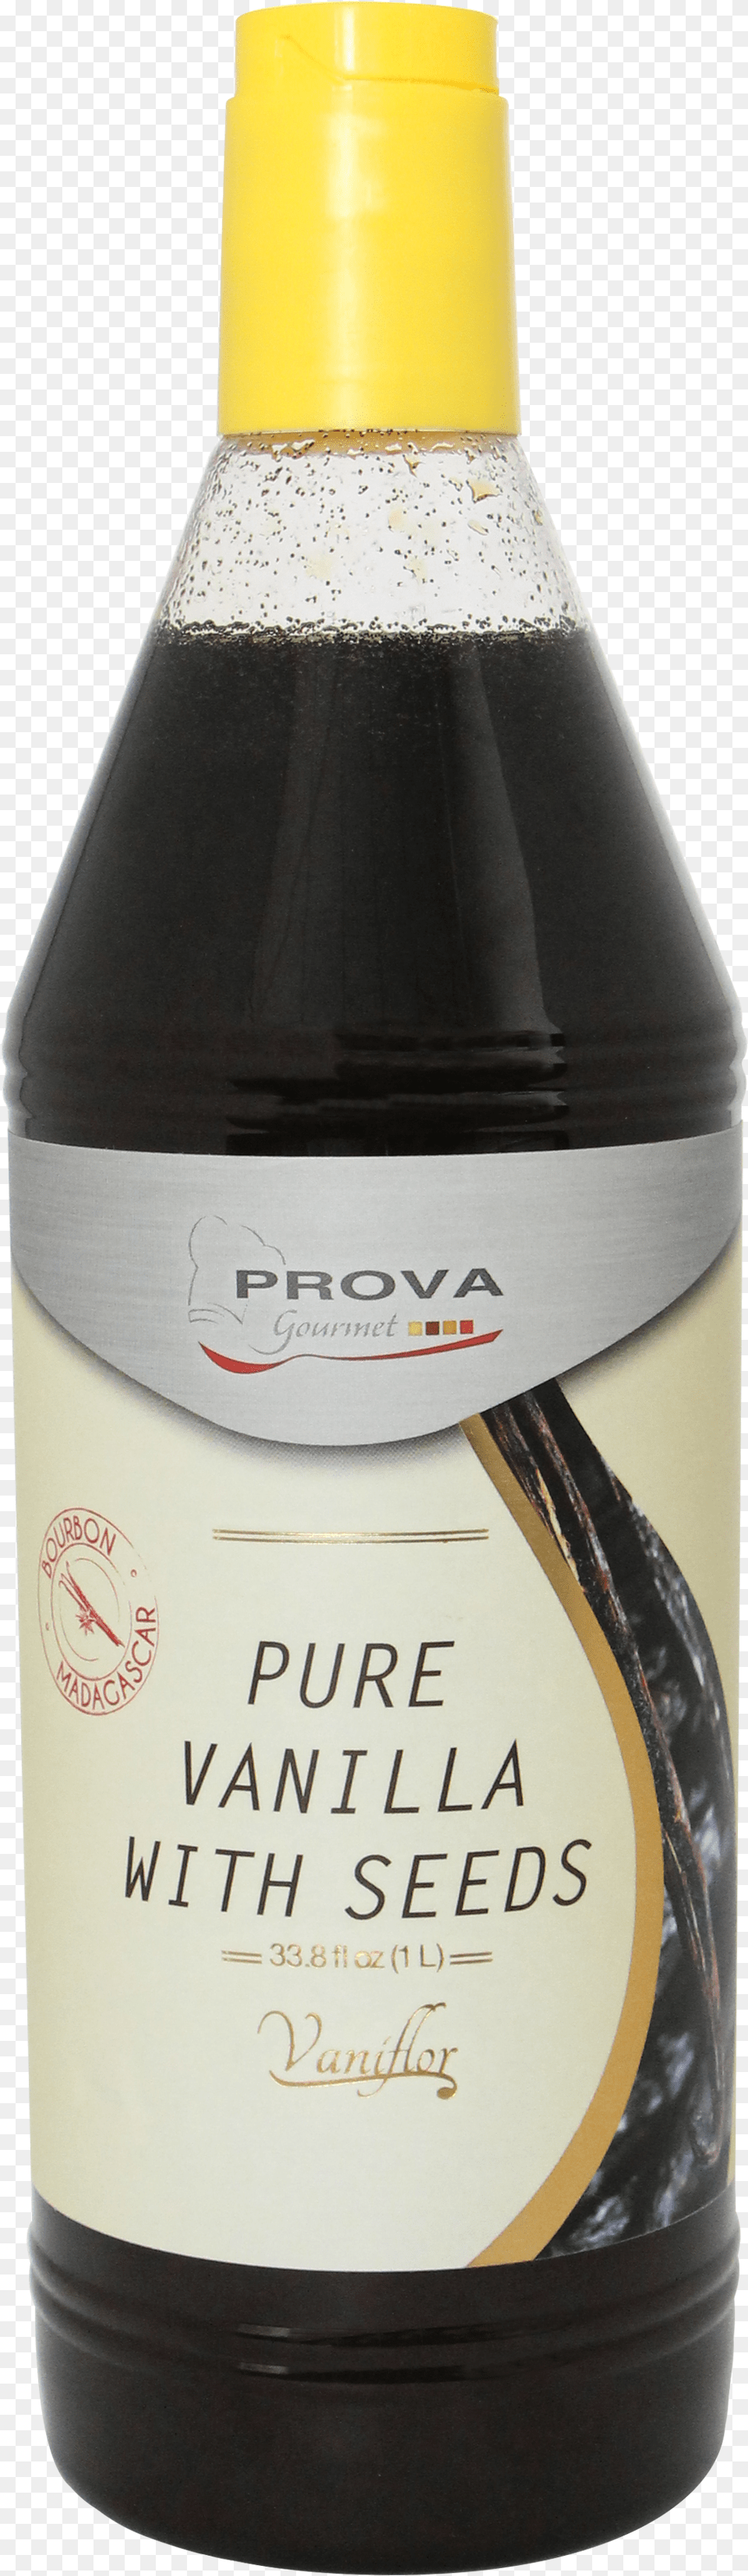 Vanilla Extract With Seeds Two Fold Alcohol Prova Vanilla Extract With Seeds, Bottle, Beer, Beverage Png